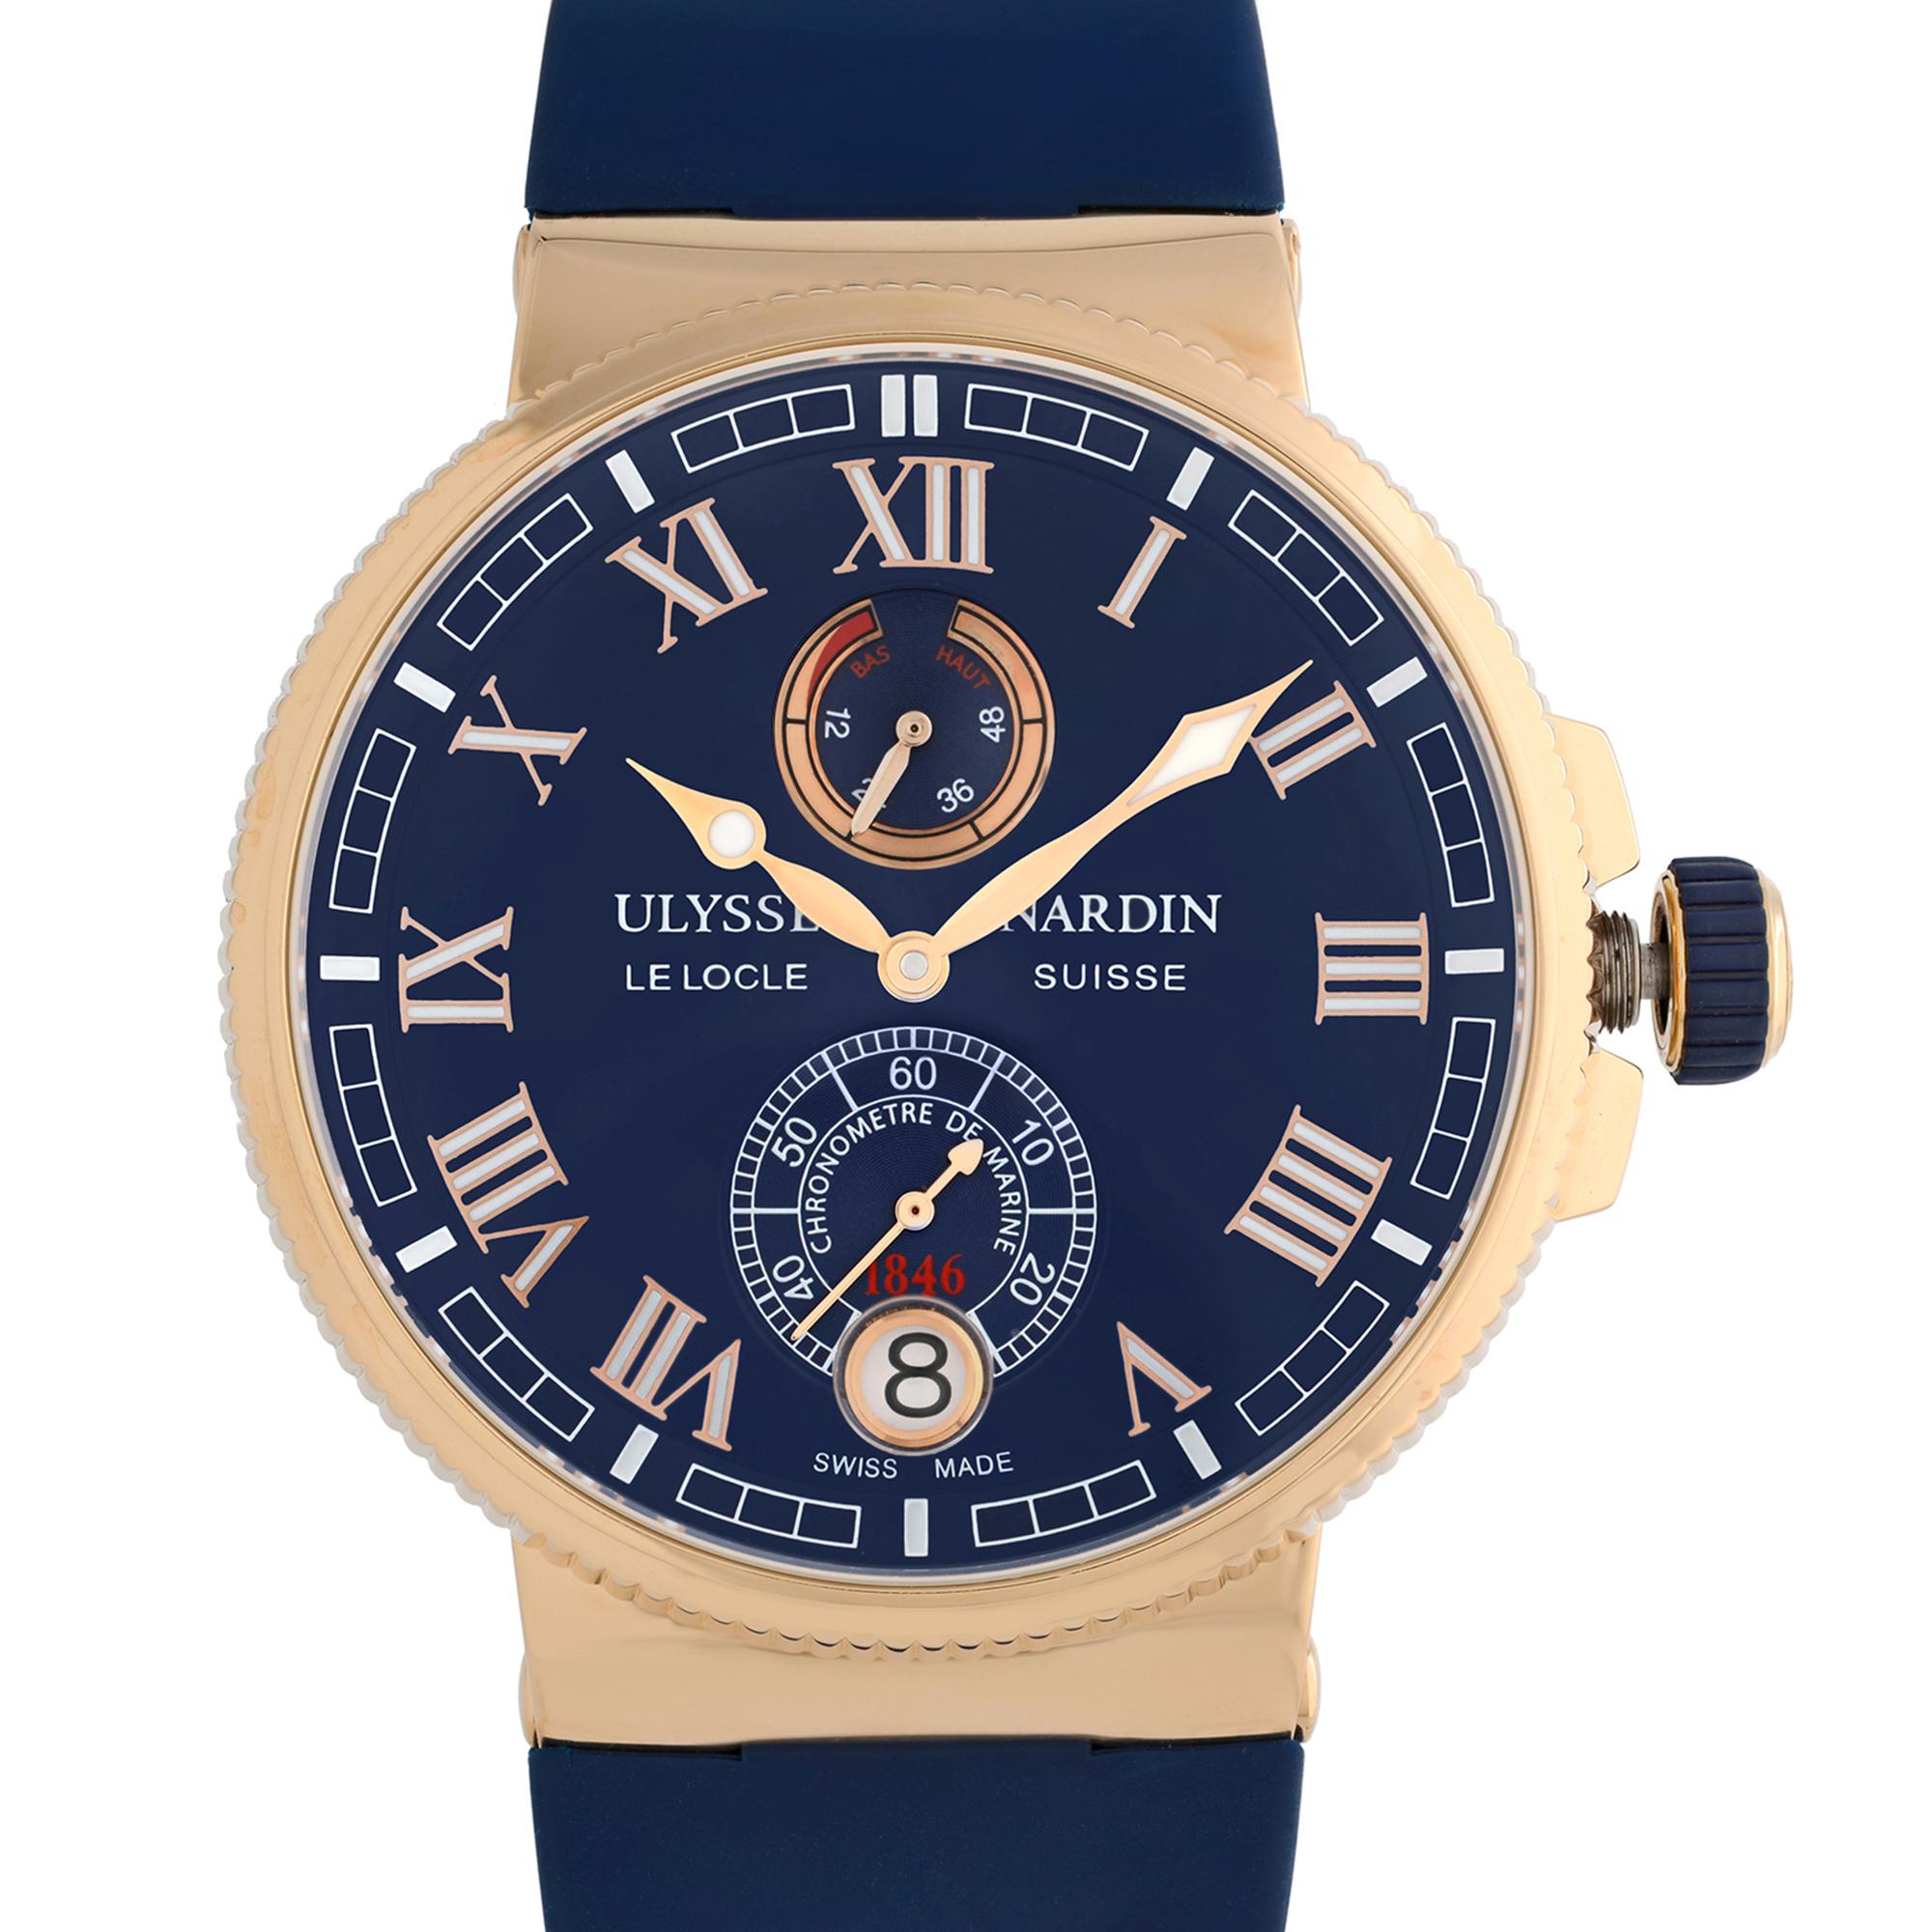 Pre-owned Ulysse Nardin Marine Chronometer 18K Rose Gold Automatic Mens Watch. This Beautiful Timepiece Features: 18kt Rose Gold Case with a Blue Rubber with 18kt Rose Gold Inserts Strap, Fixed Coin Edge 18kt Rose Gold Bezel, Blue Dial with Rose